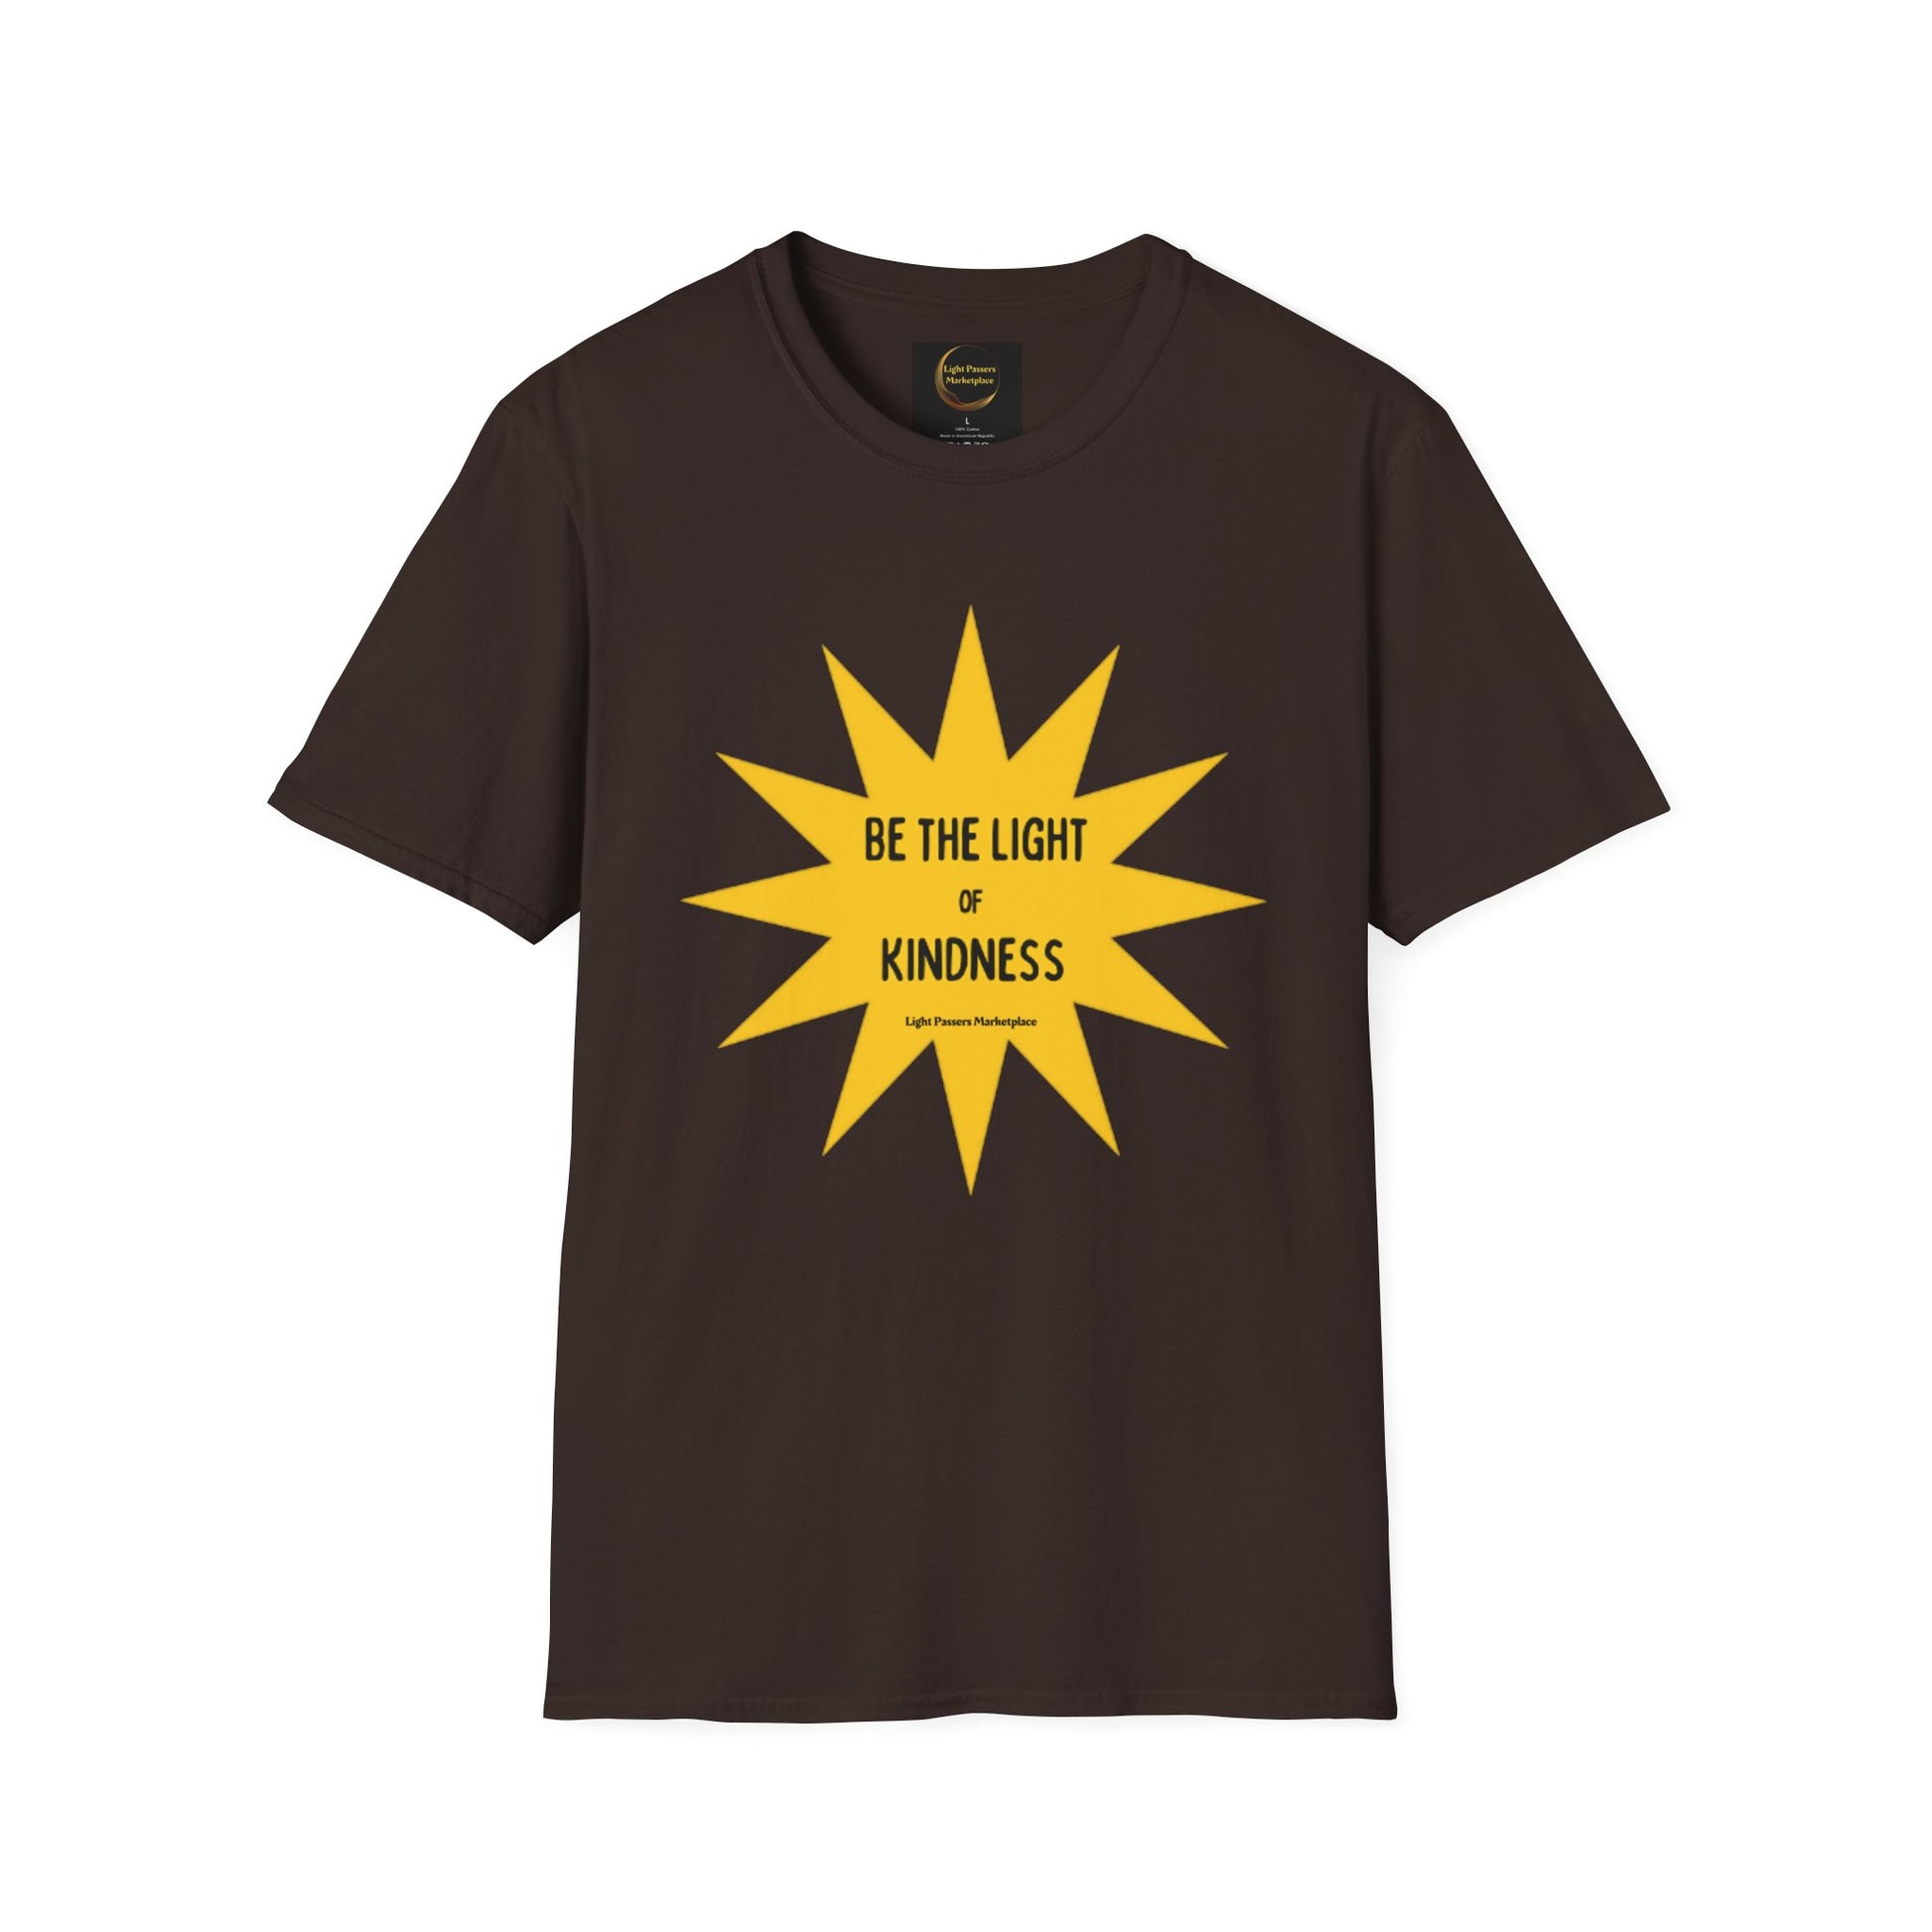 Unisex brown tee with a yellow sun and star design. 100% cotton, no side seams for comfort, tear-away label, classic fit. Elevate your casual style with this staple tee.